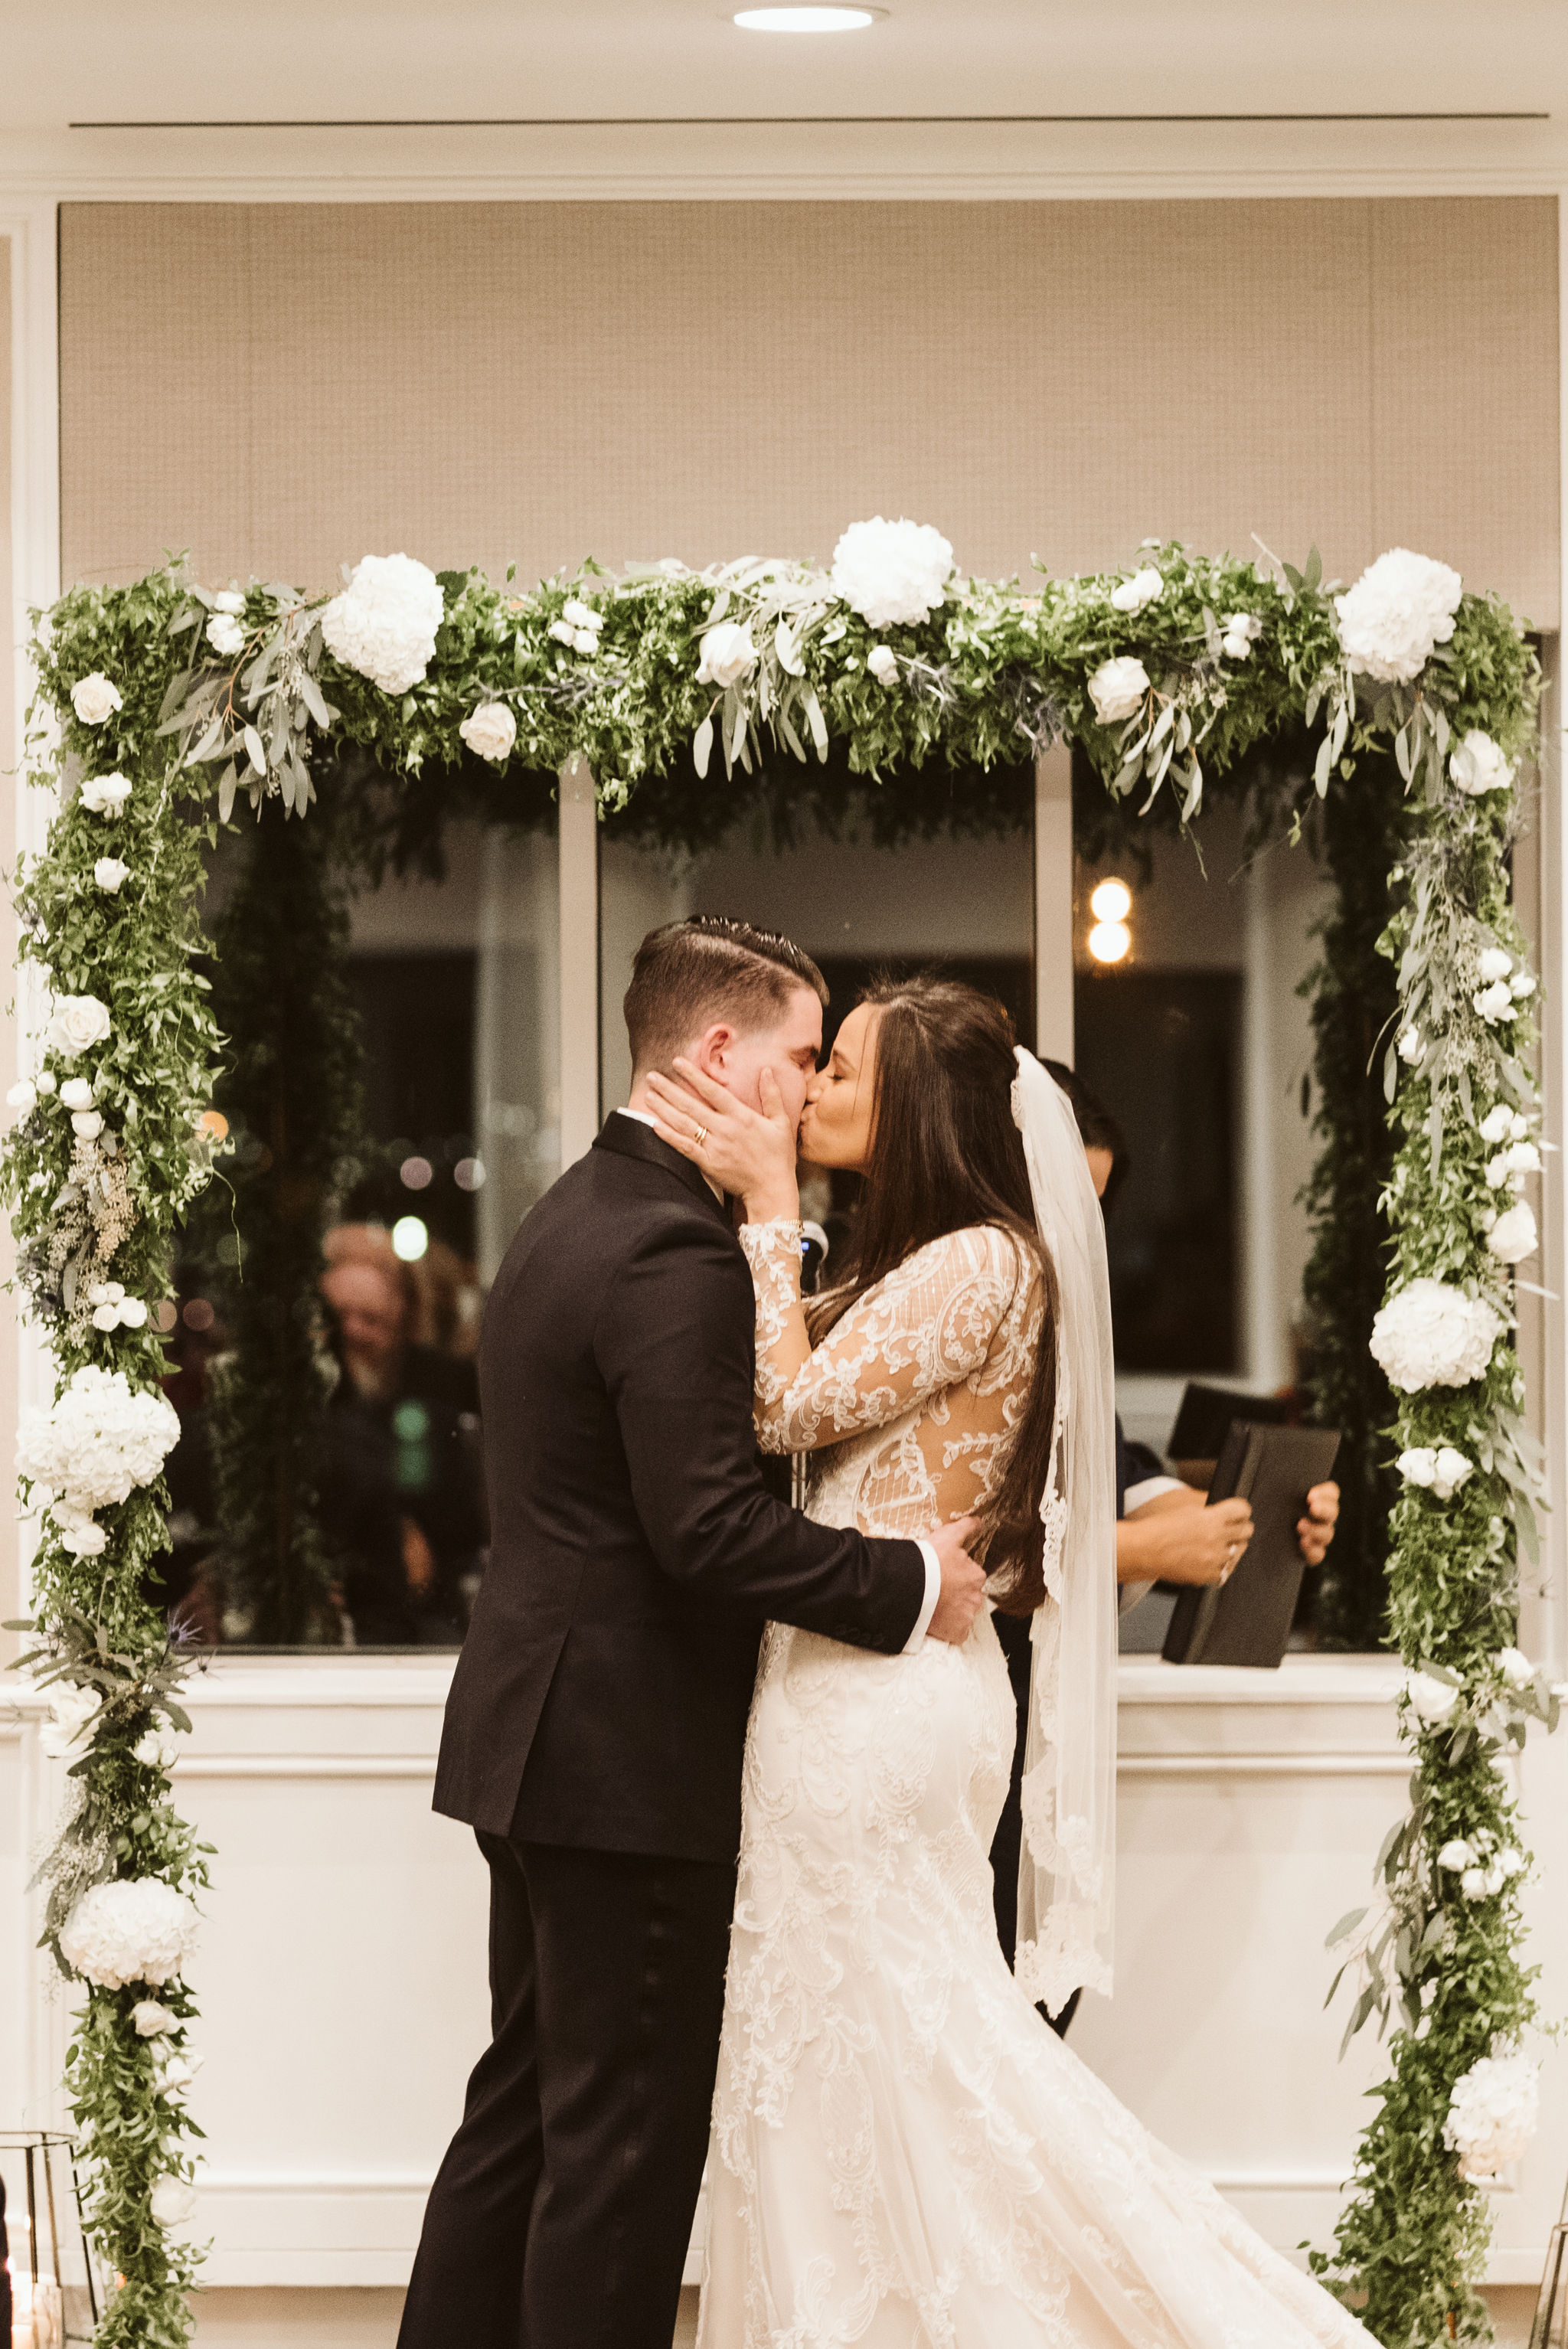  Baltimore, Fells Point, Maryland Wedding Photographer, Winter Wedding, Historic, Classic, Vintage, Bride and Groom Share First Kiss, Just Married, Lace Wedding Dress, Nutmeg Flowers 